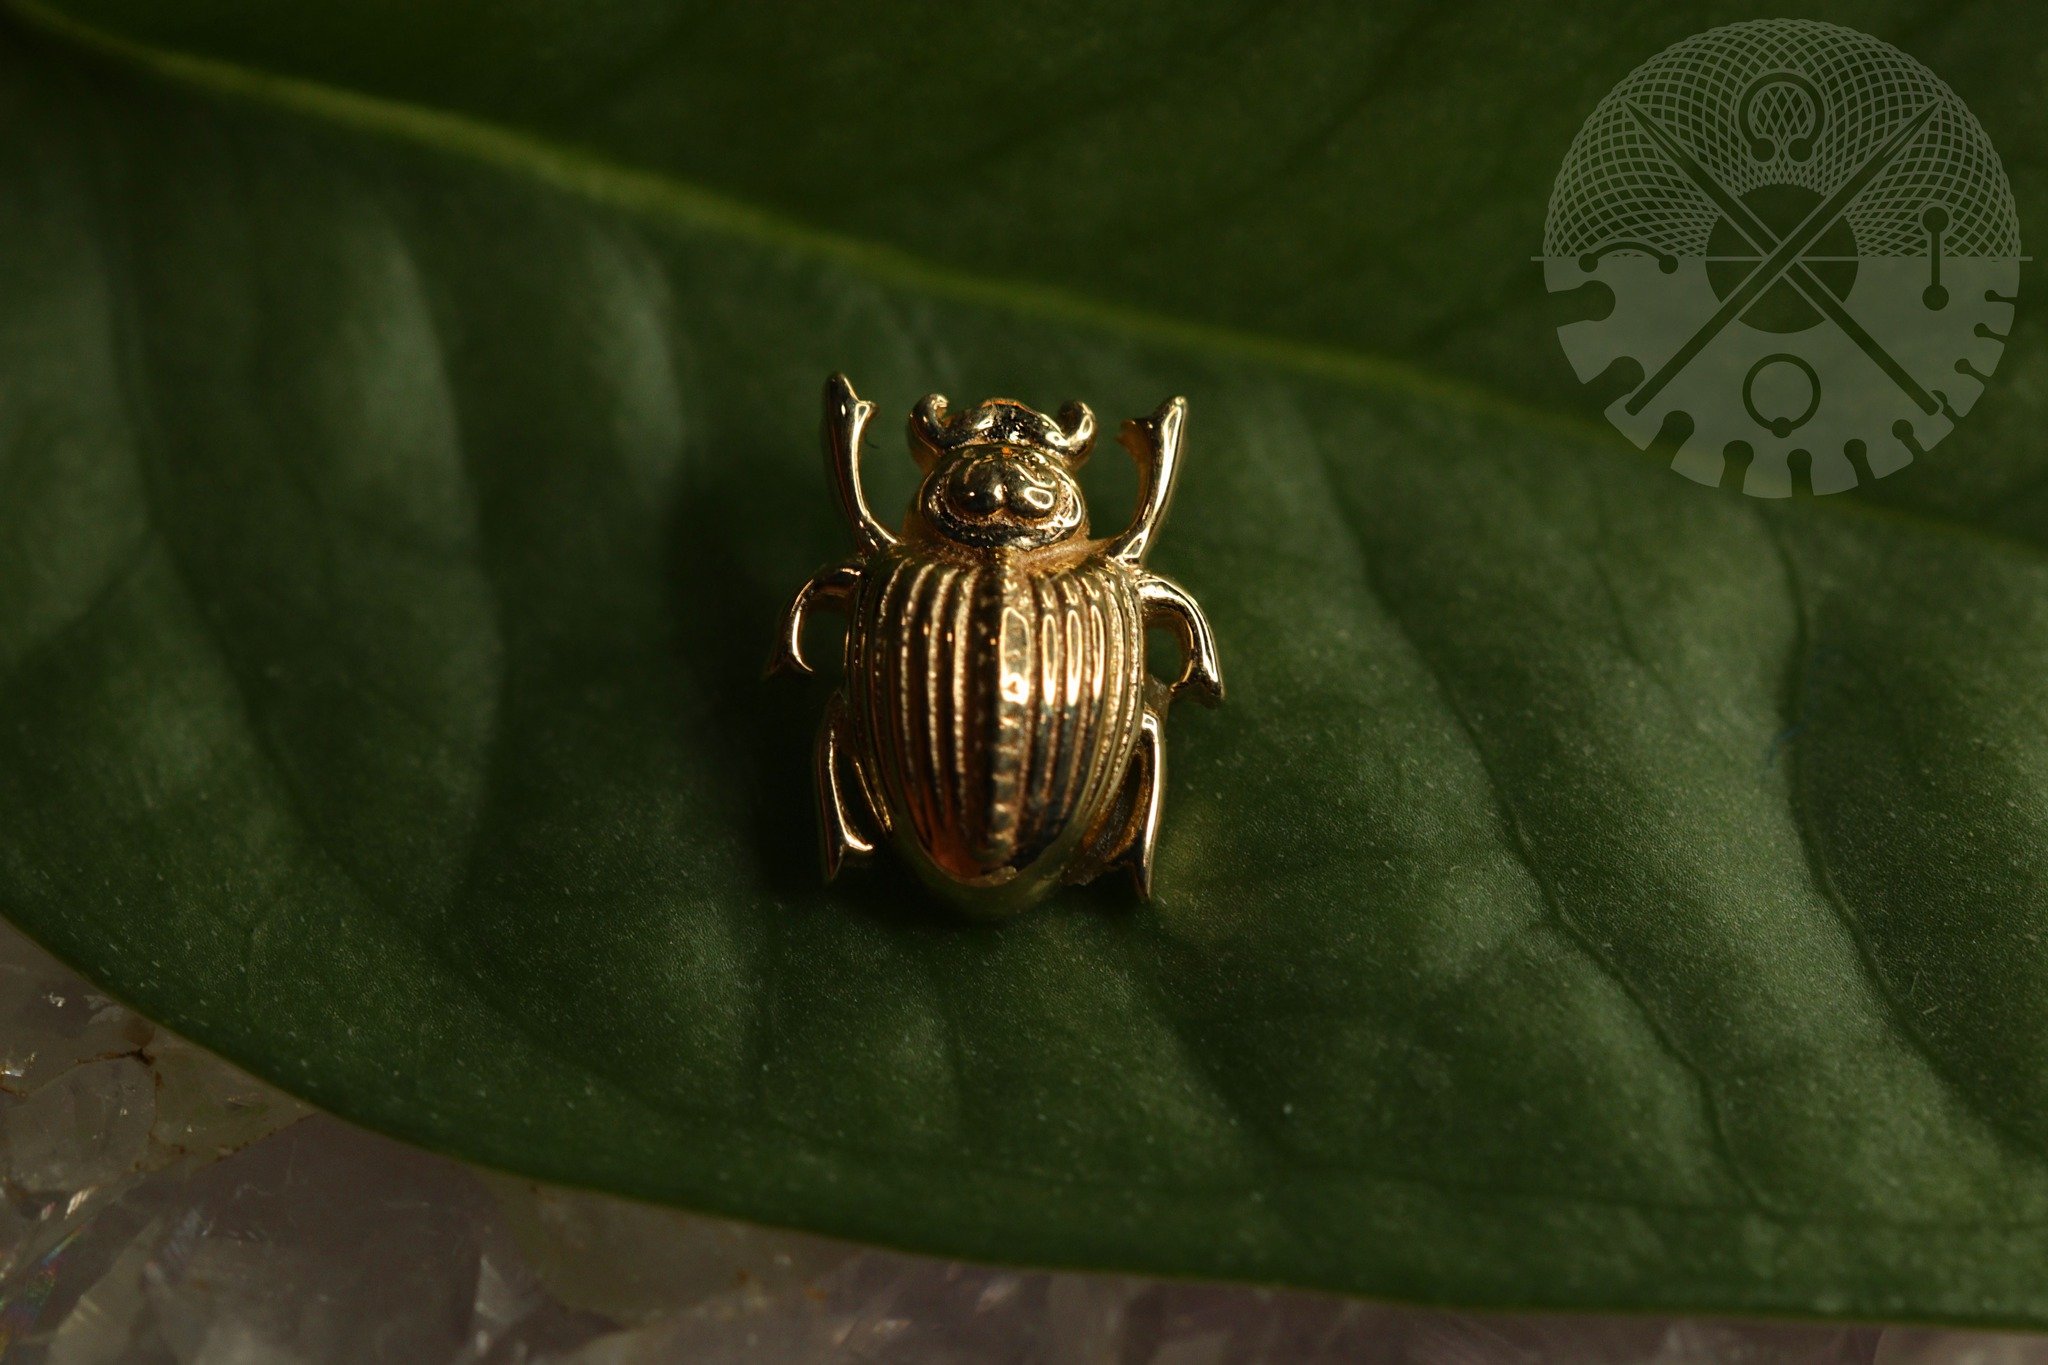 Happy Earth Day, here is a beautiful scarab beetle from BVLA in case you needed a cute little guy on your feed :)

@bvlalove @bvla 

Good Life is appointment only for all services, consultations and even just to browse our jewelry selection. We are a